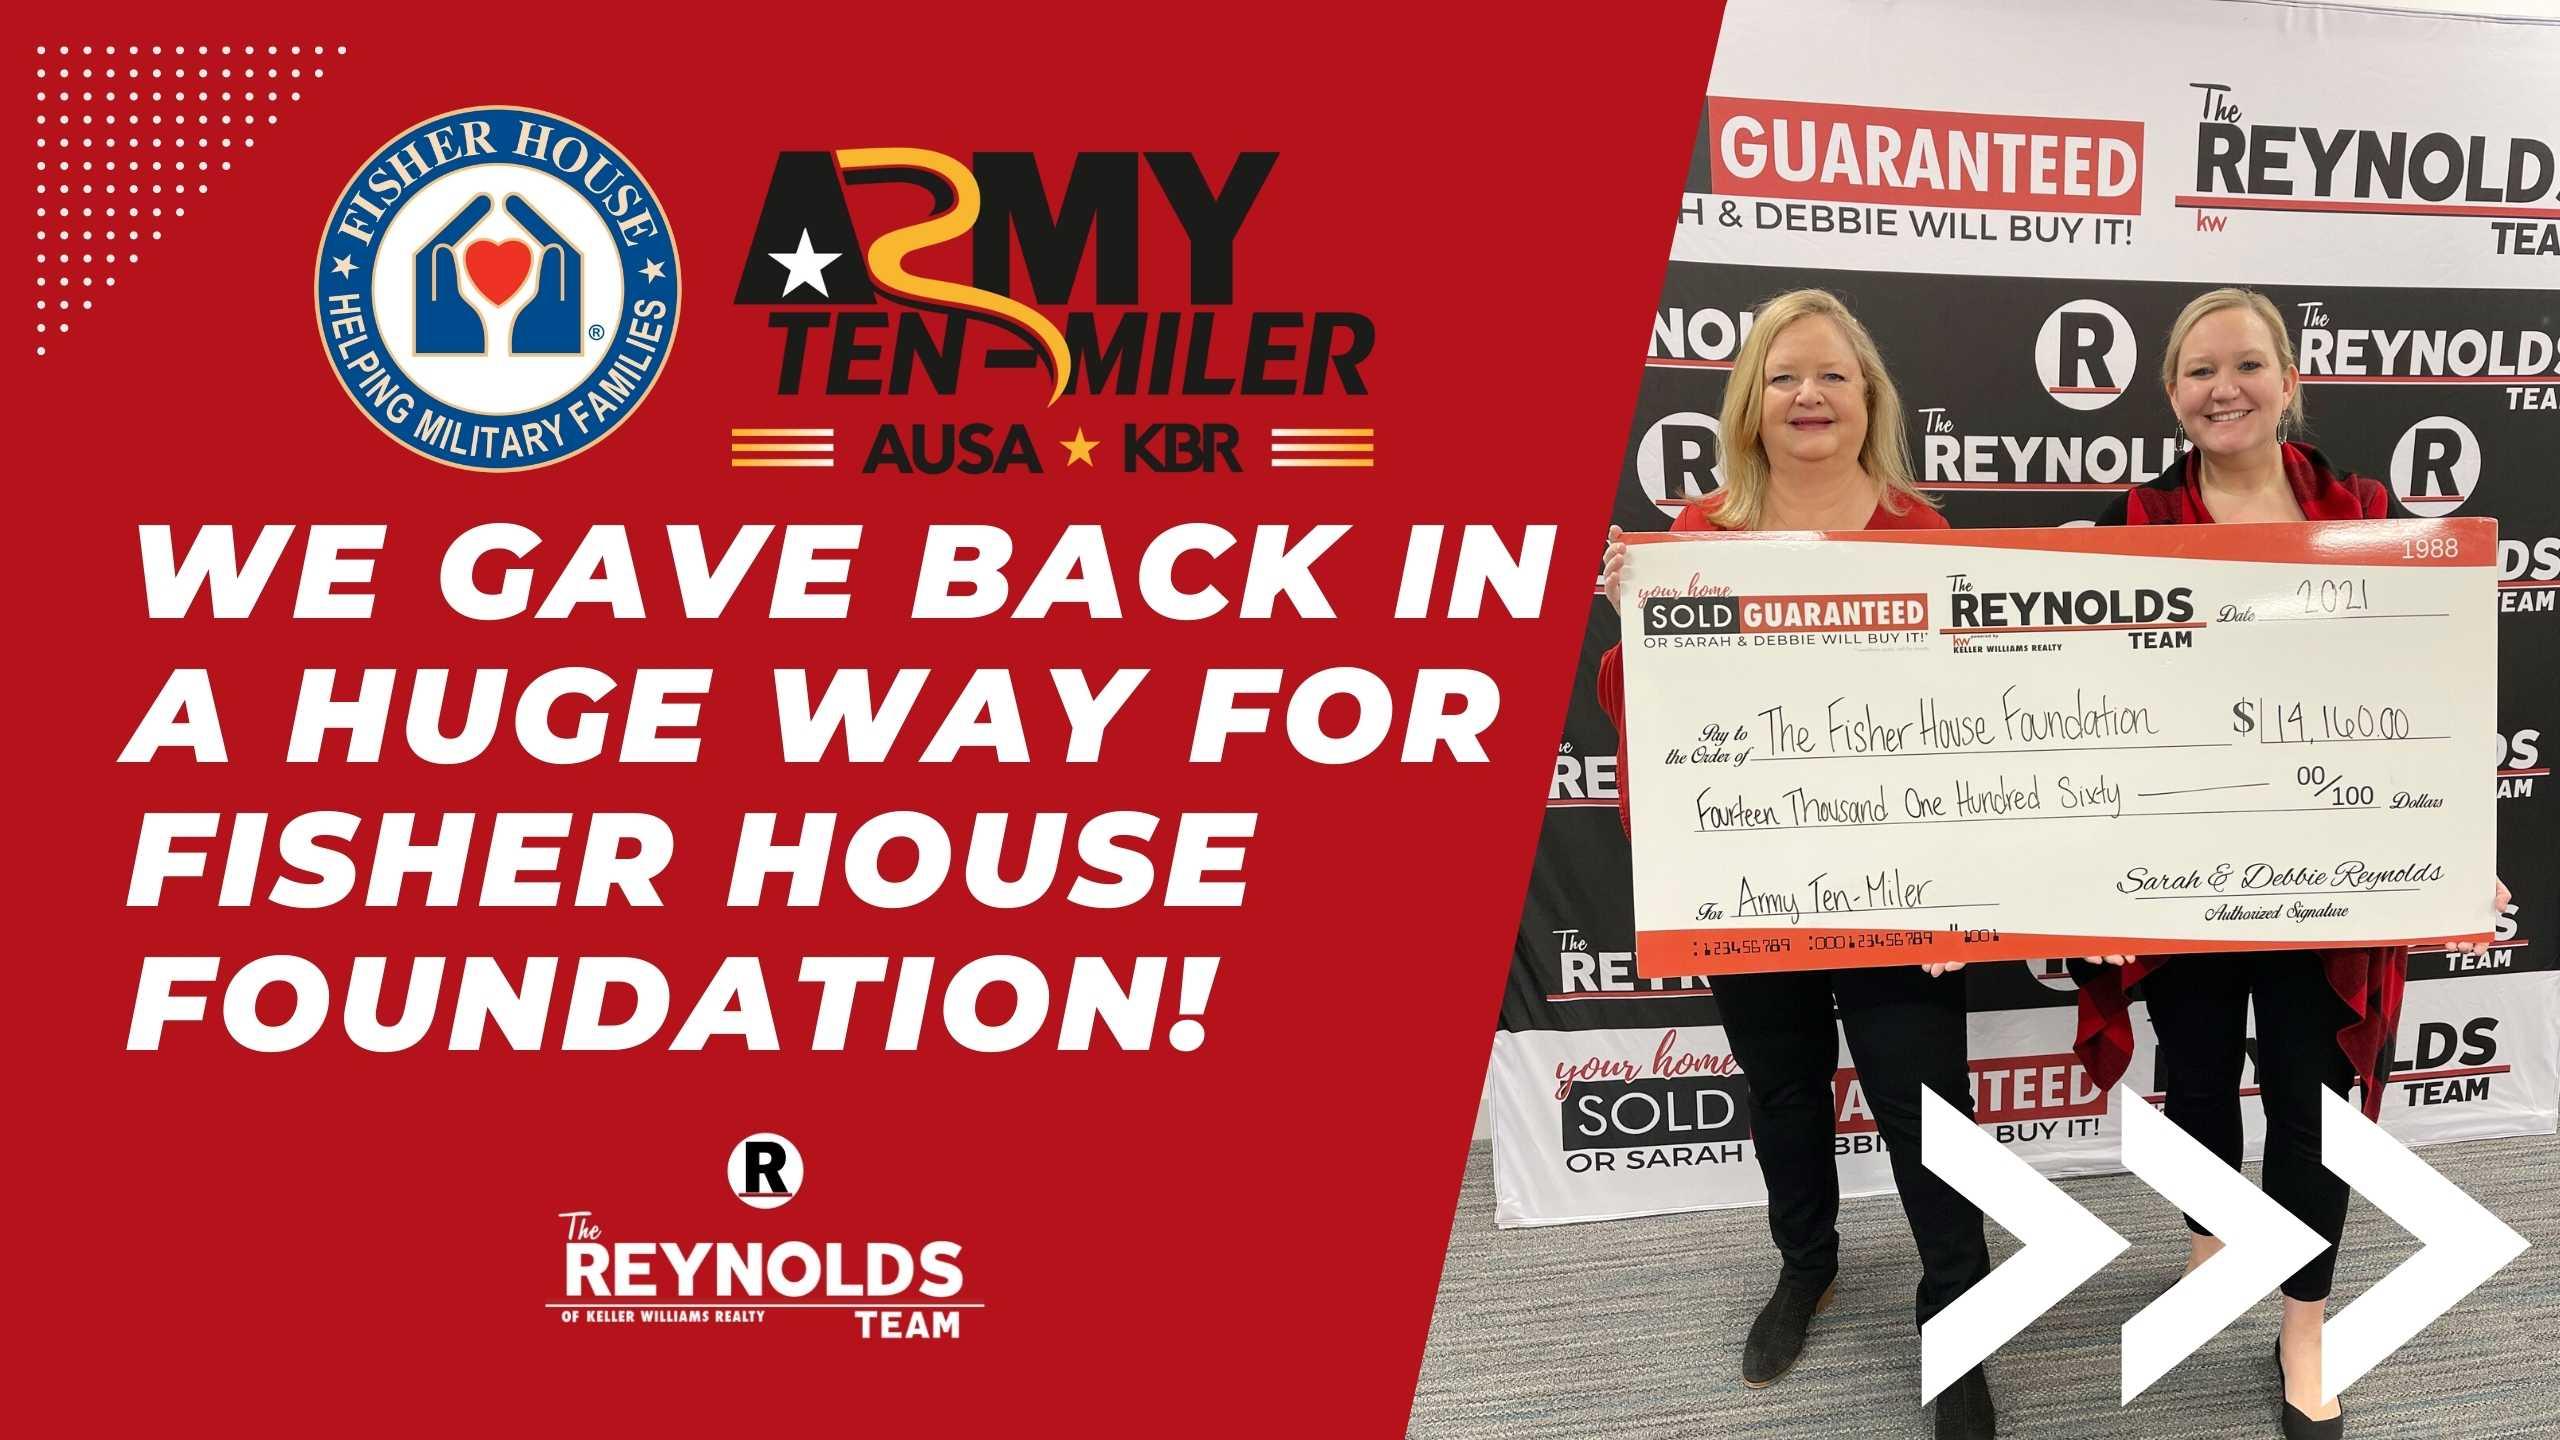 We Gave Back in a HUGE Way for Fisher House Foundation!